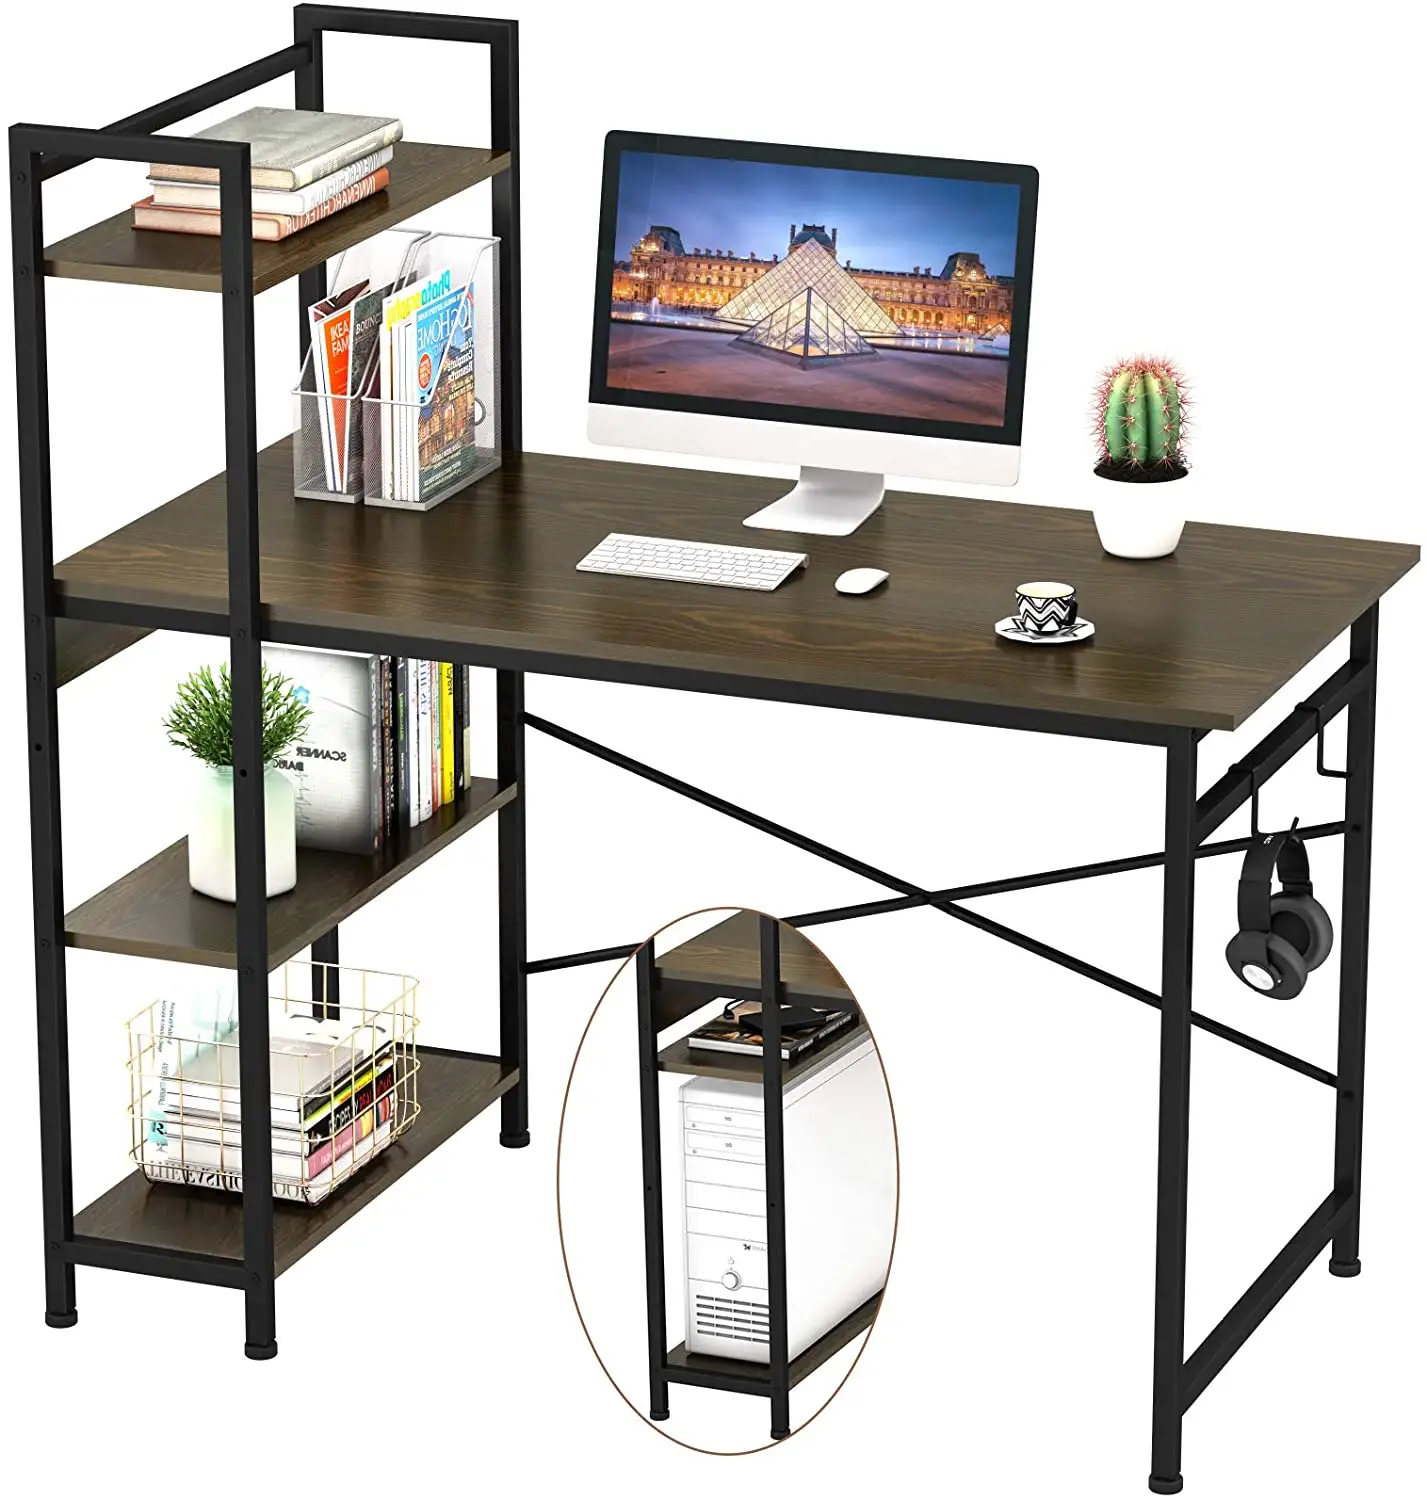 Computer Desk with 4 Tier Shelves for Home Office 47" Writing Study Table with Bookshelf and 2 Hooks Multipurpose Wood Desk